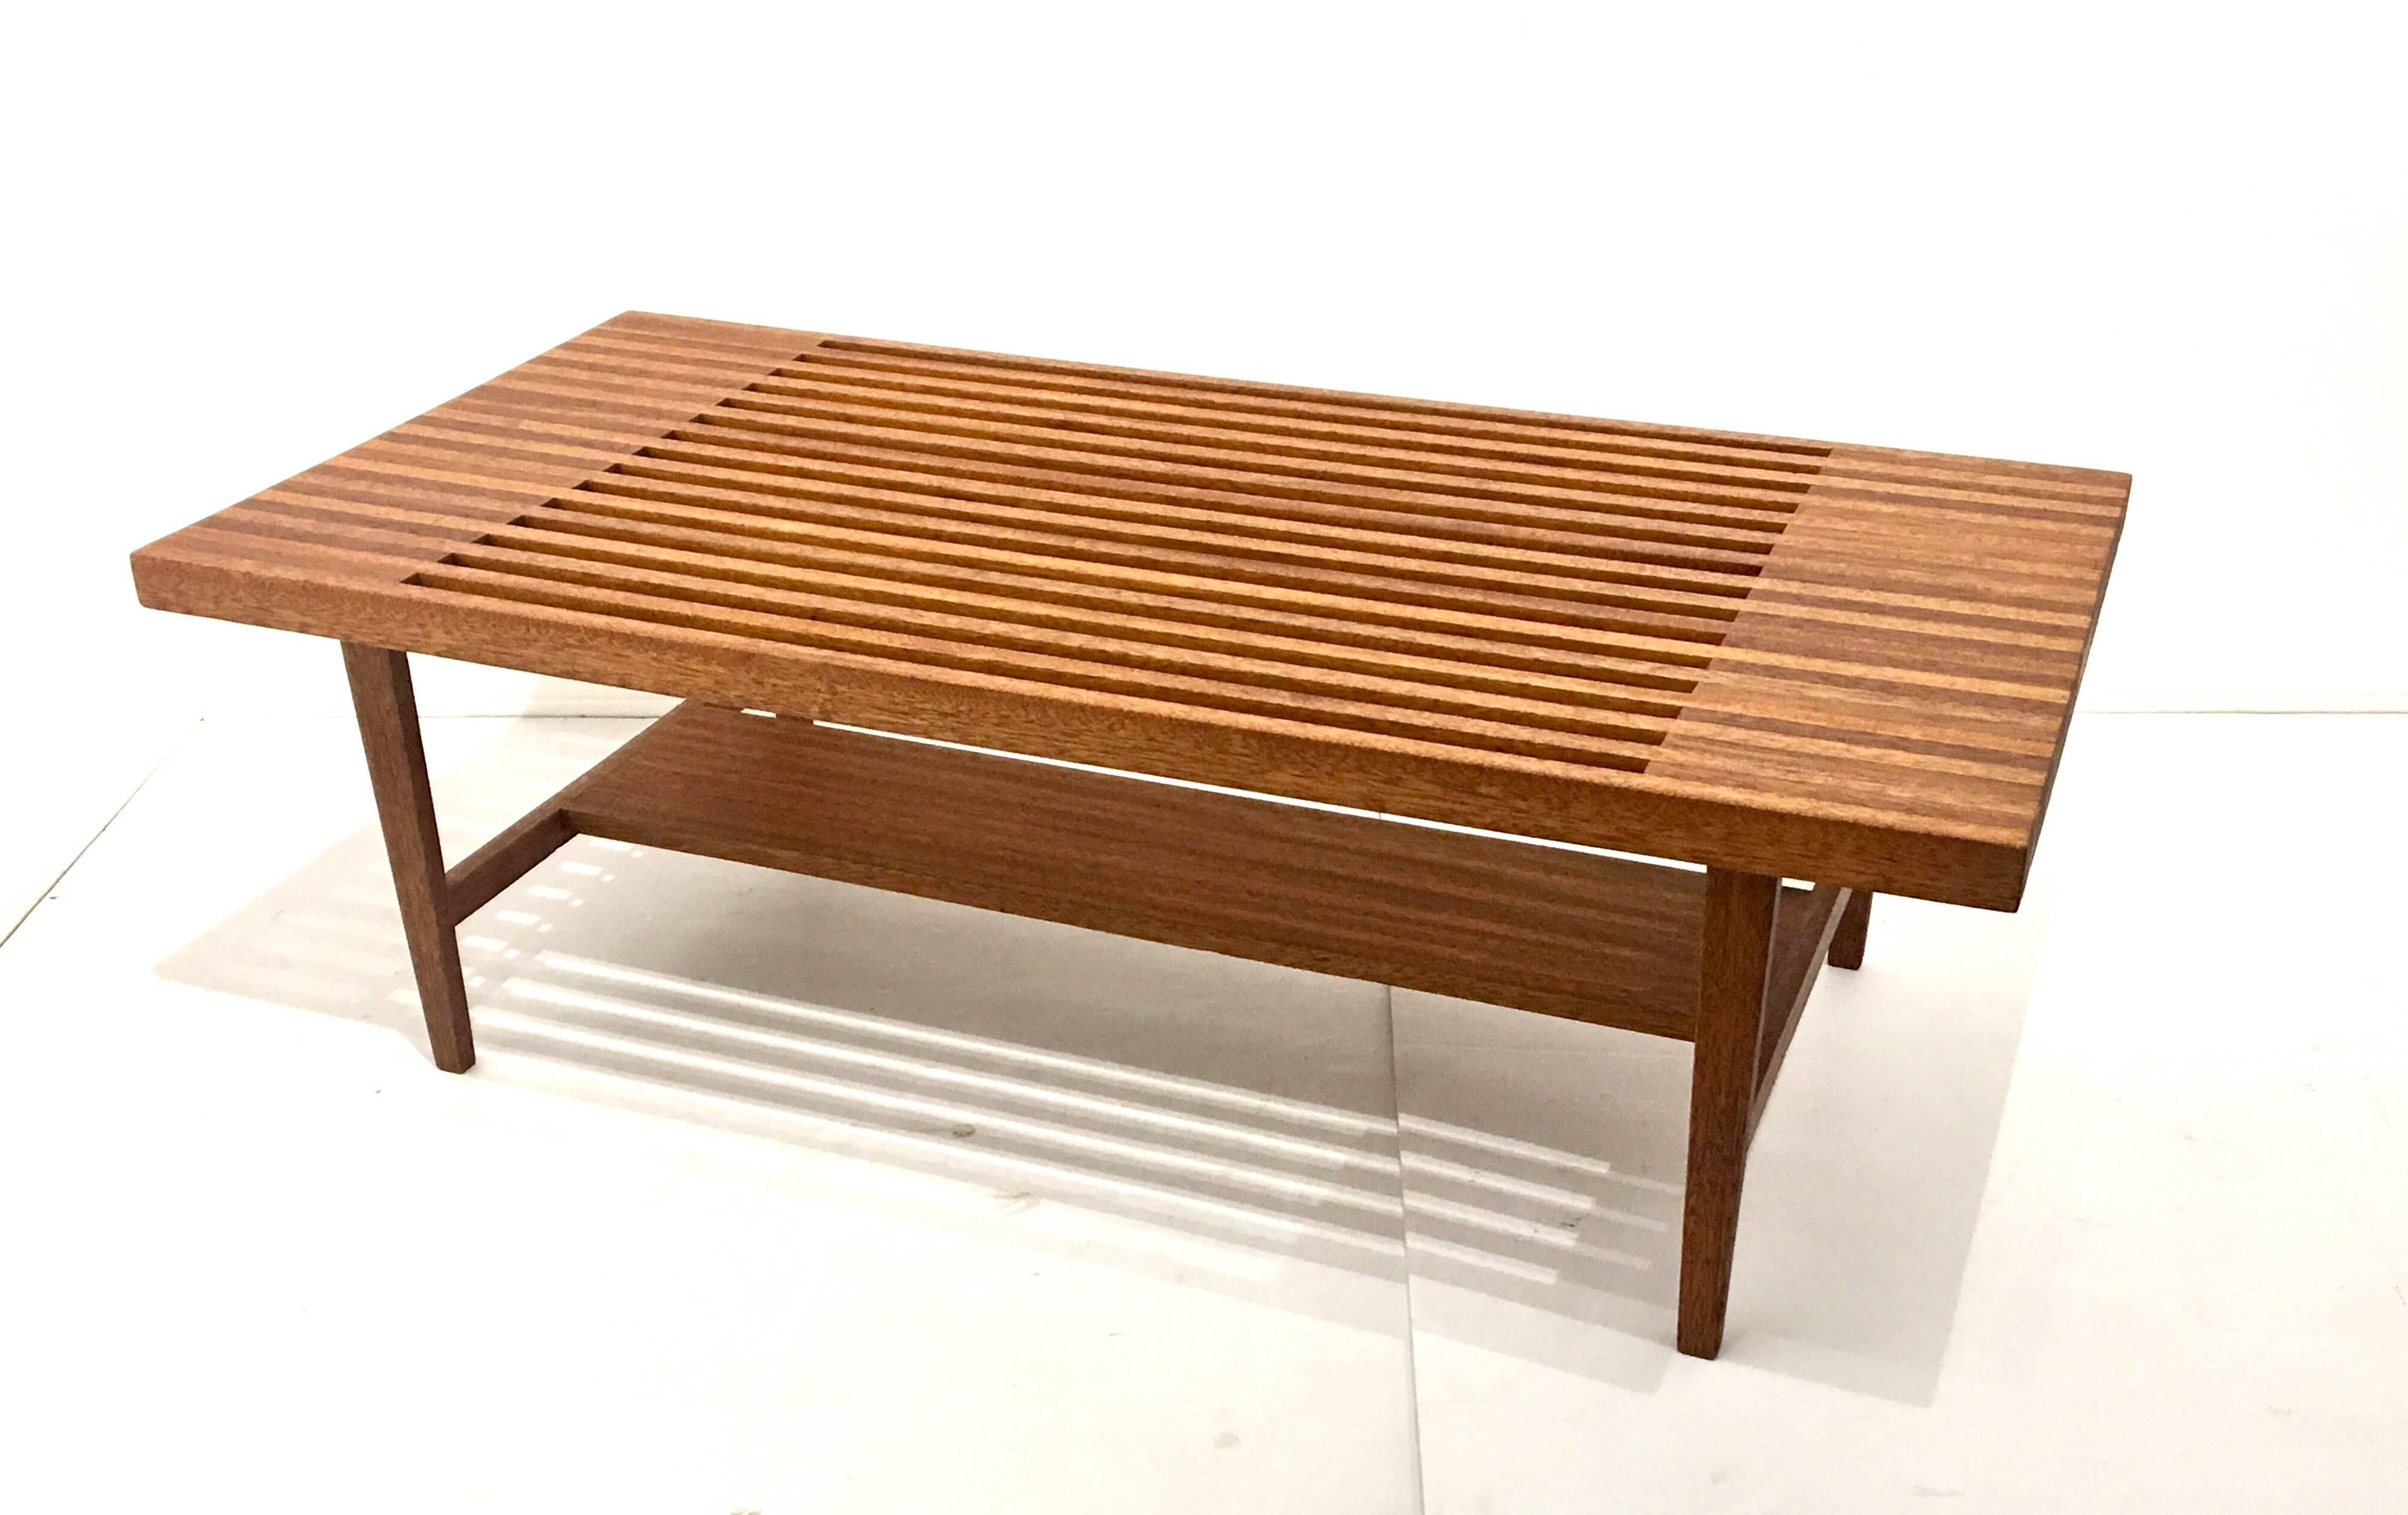 20th Century One Mid-Century Modern Solid Mahogany Coffee Table with Shelf